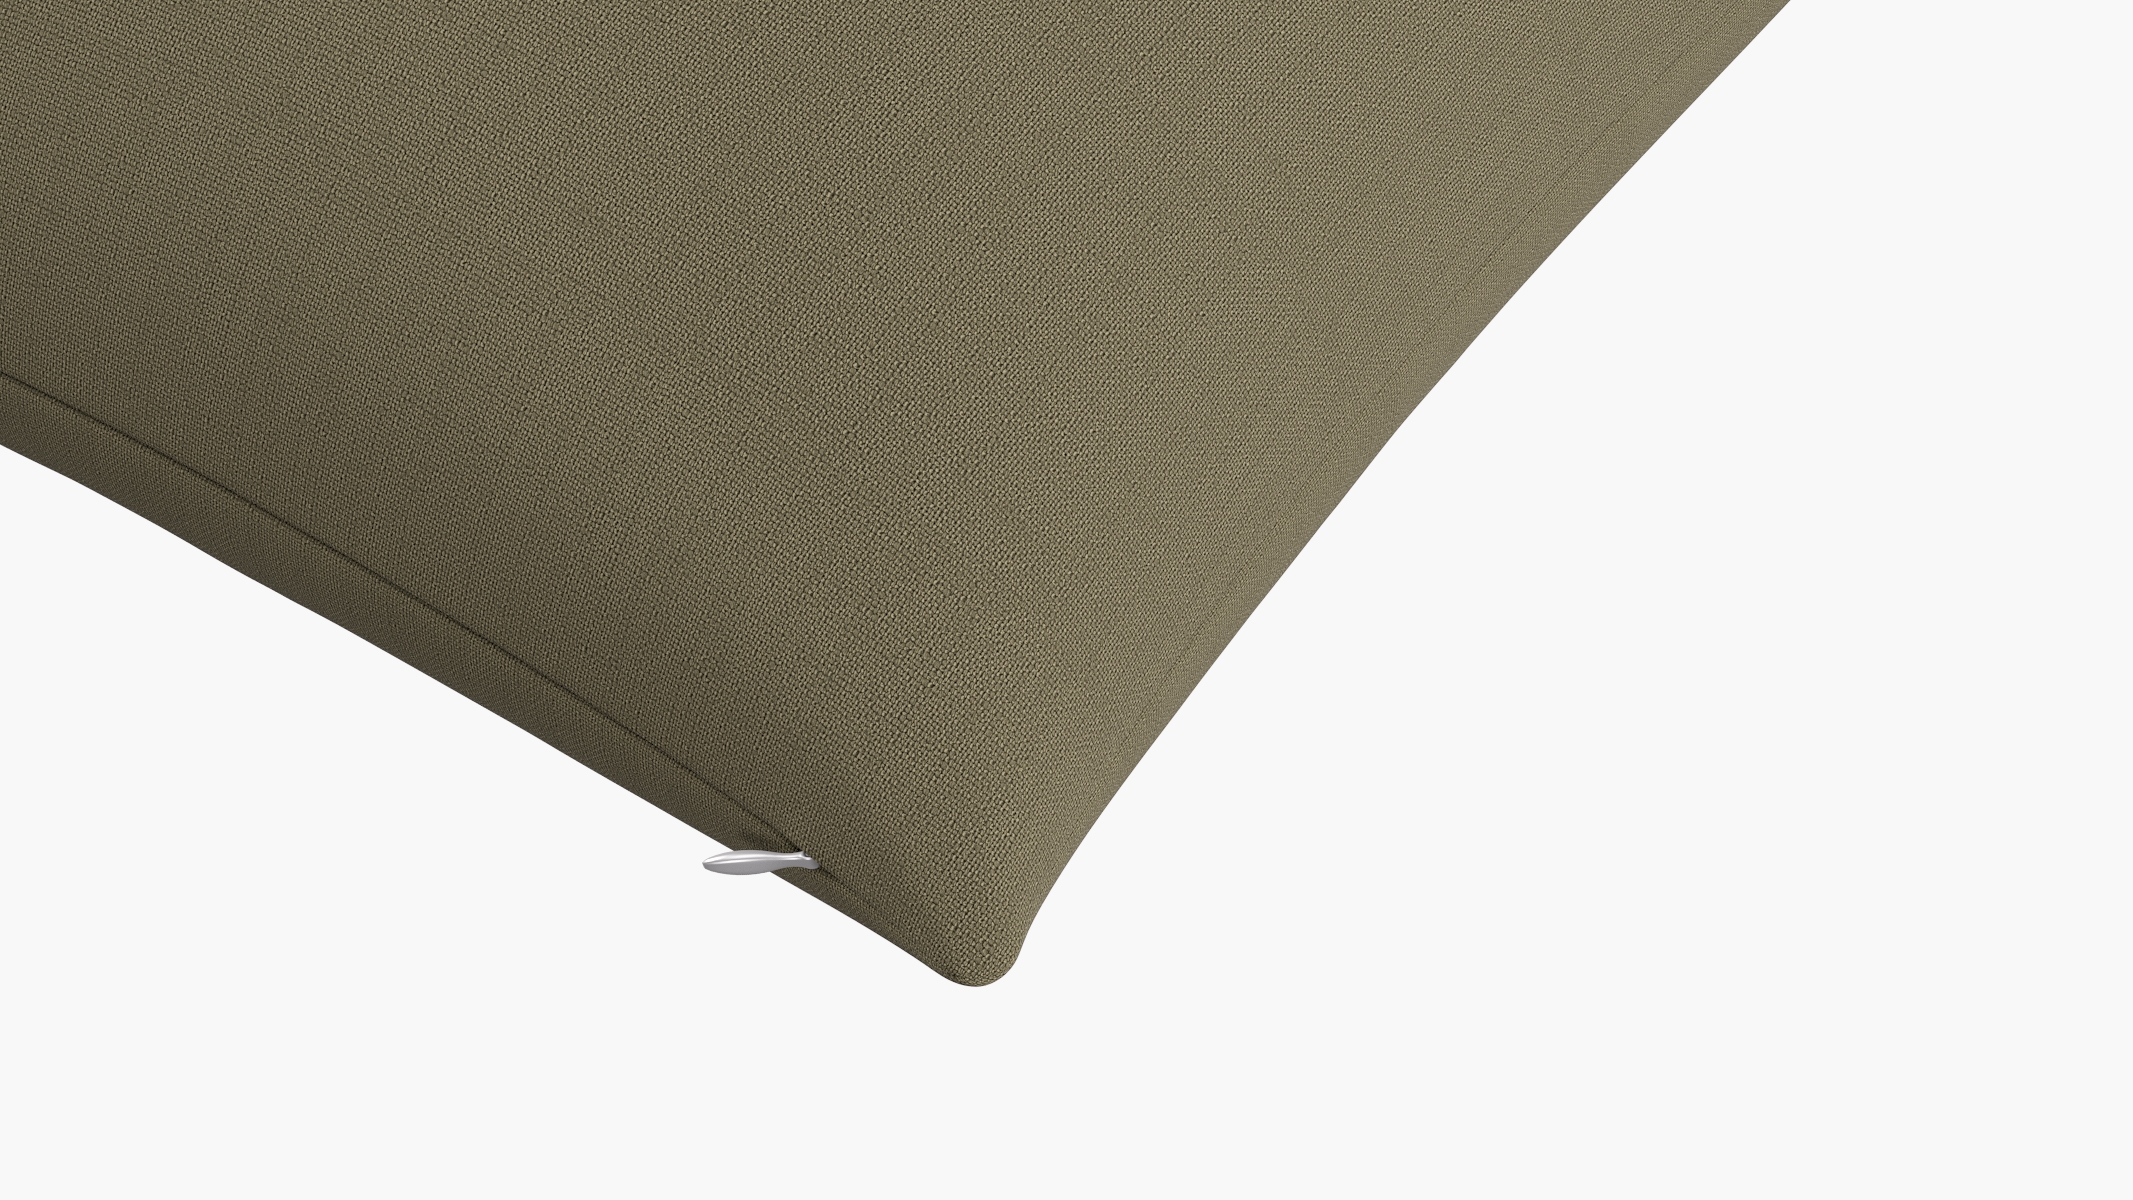 Throw Pillow 22", Olive Everyday Linen, 22" x 22" - Image 1